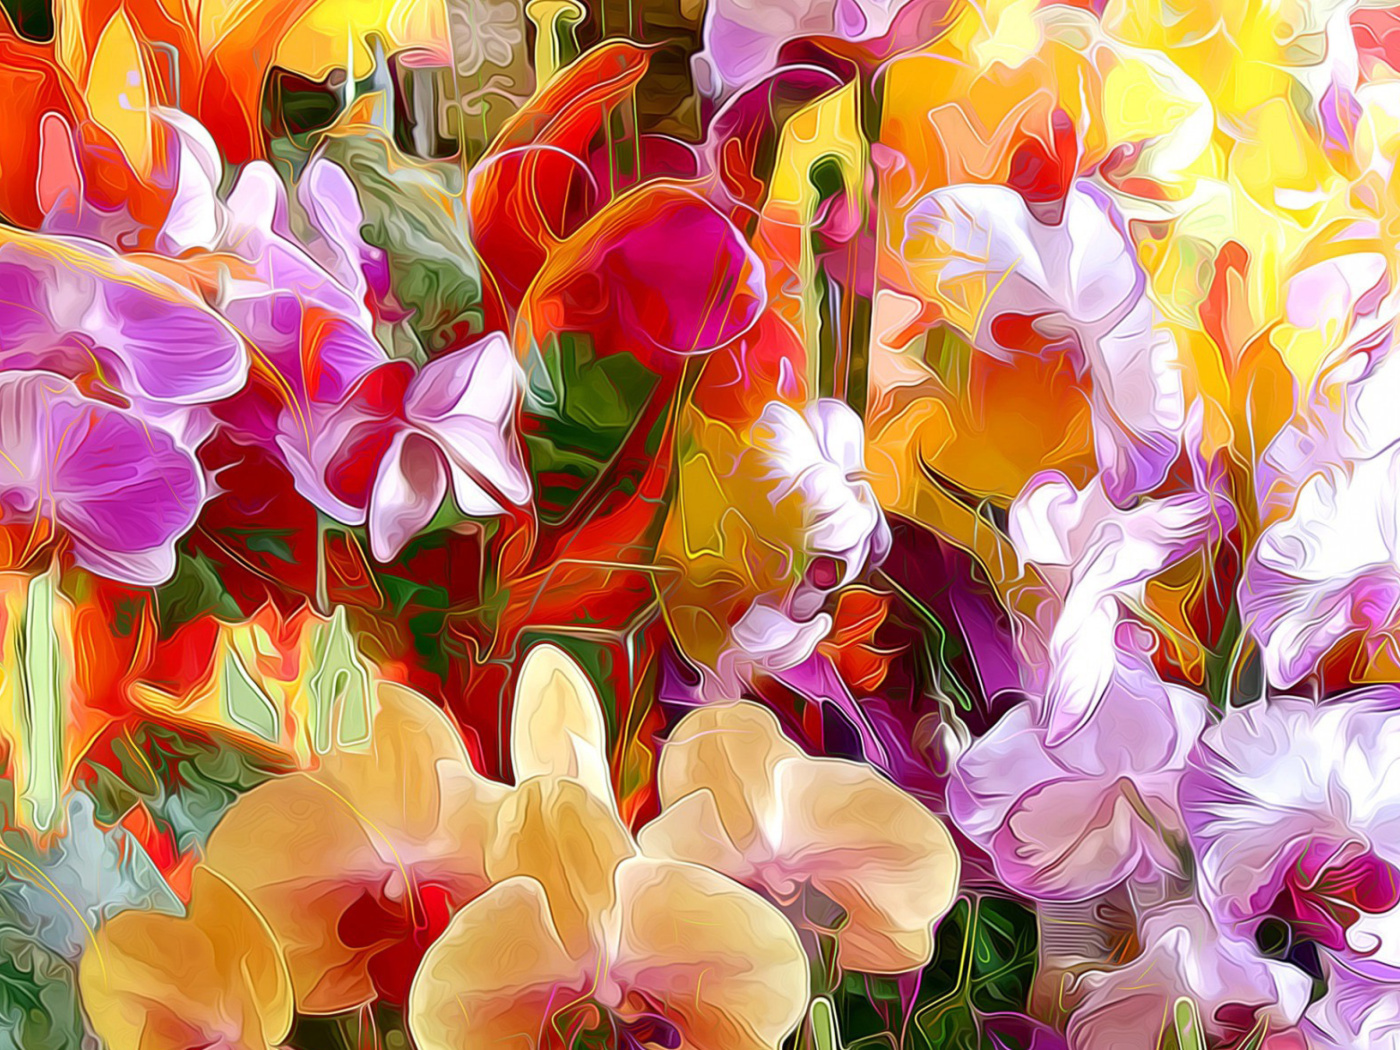 Beautiful flower drawn by oil color on canvas screenshot #1 1400x1050